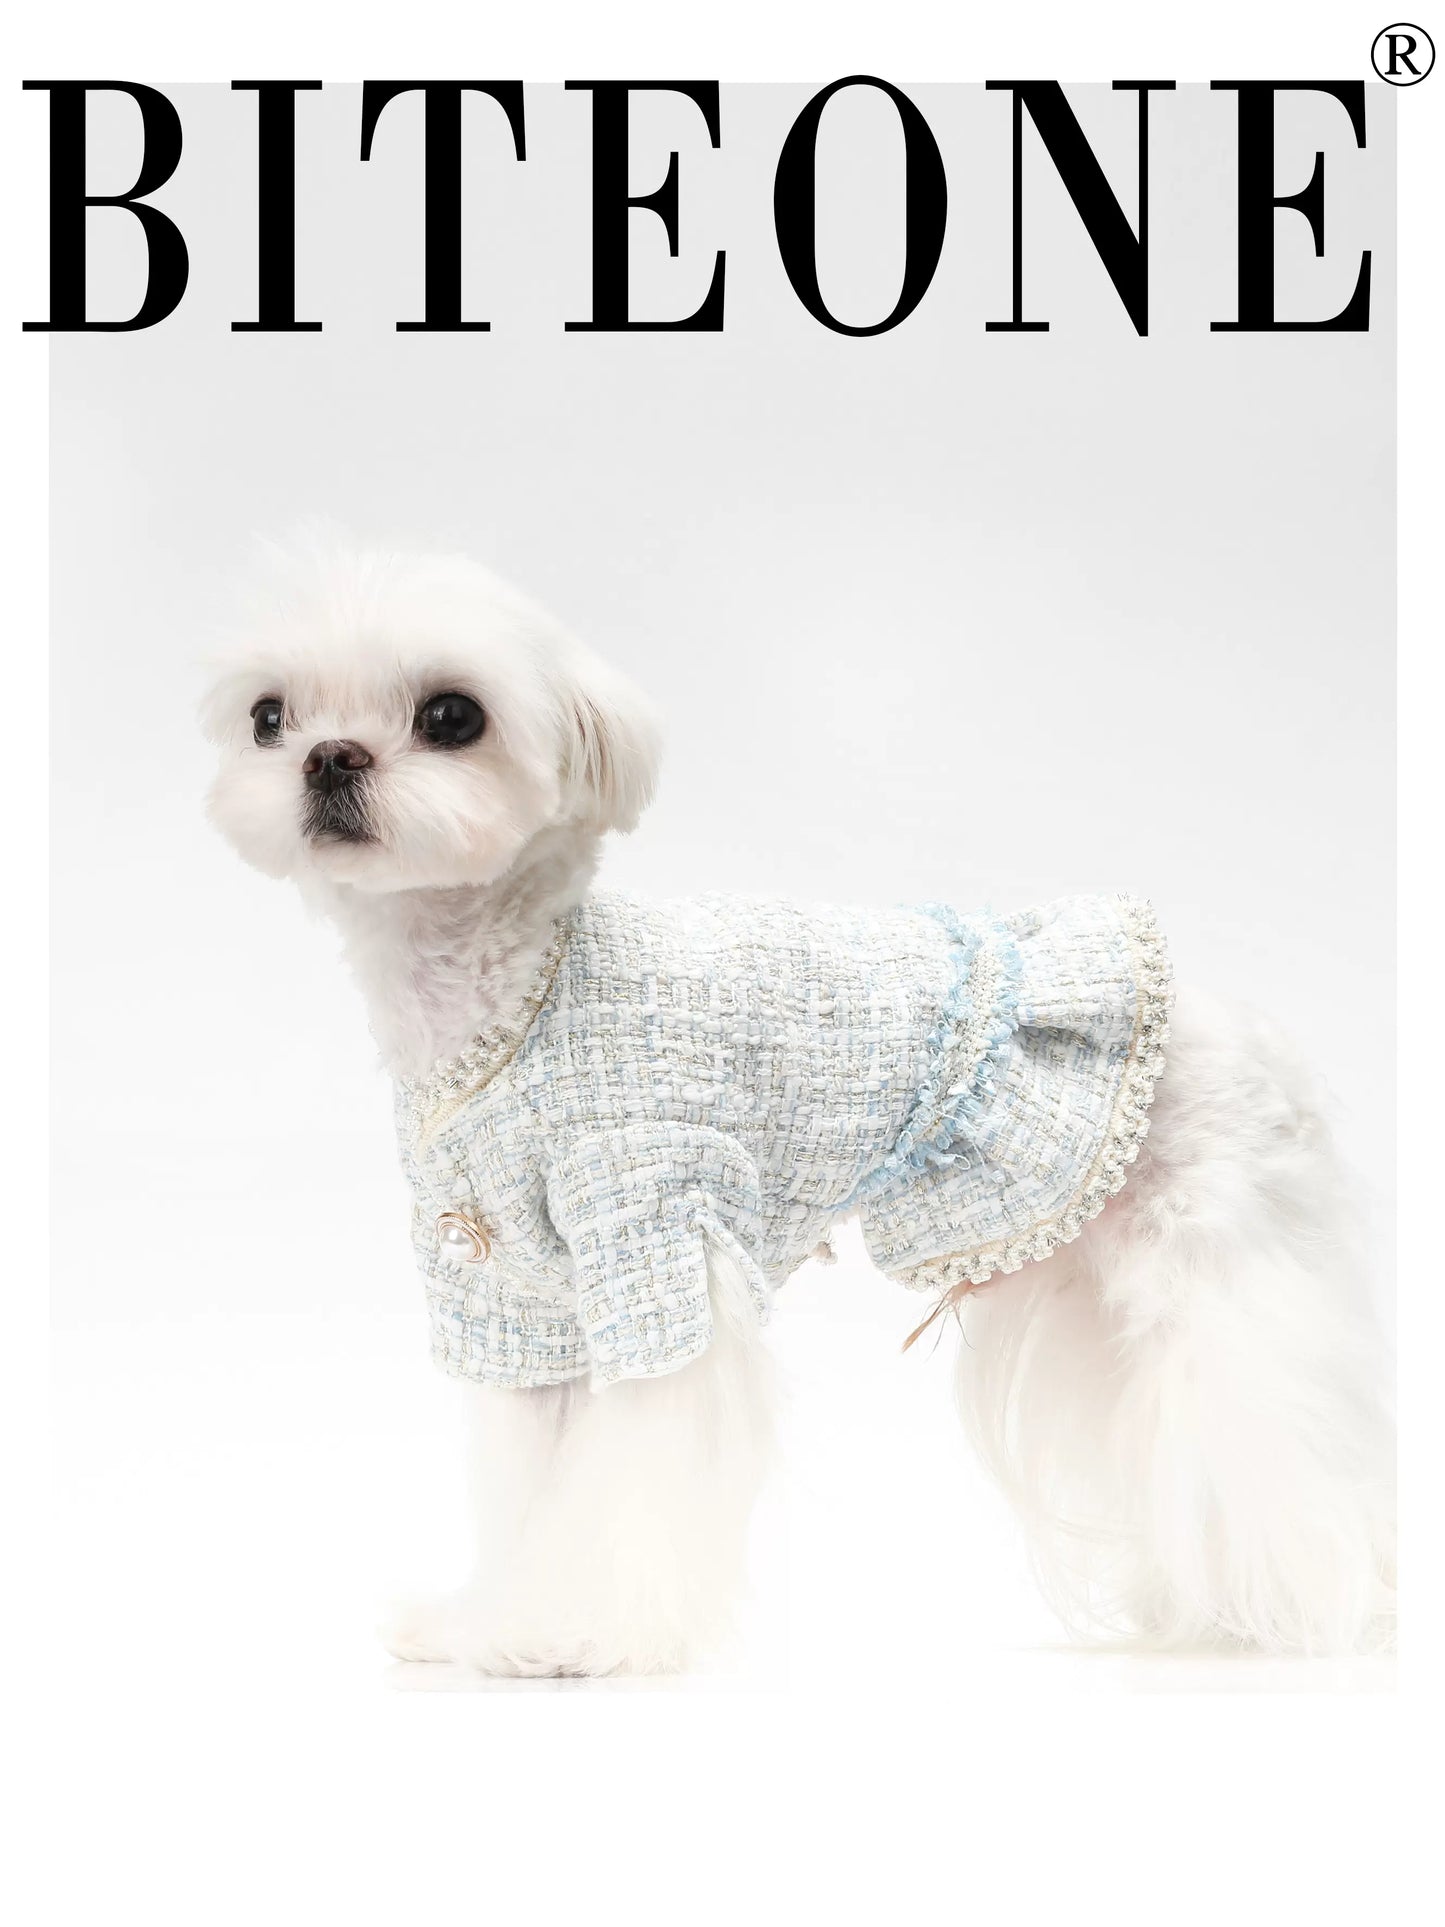 BITEONE: Chic Winter Pet Apparel with Combed Cotton Lining + Textured Wool